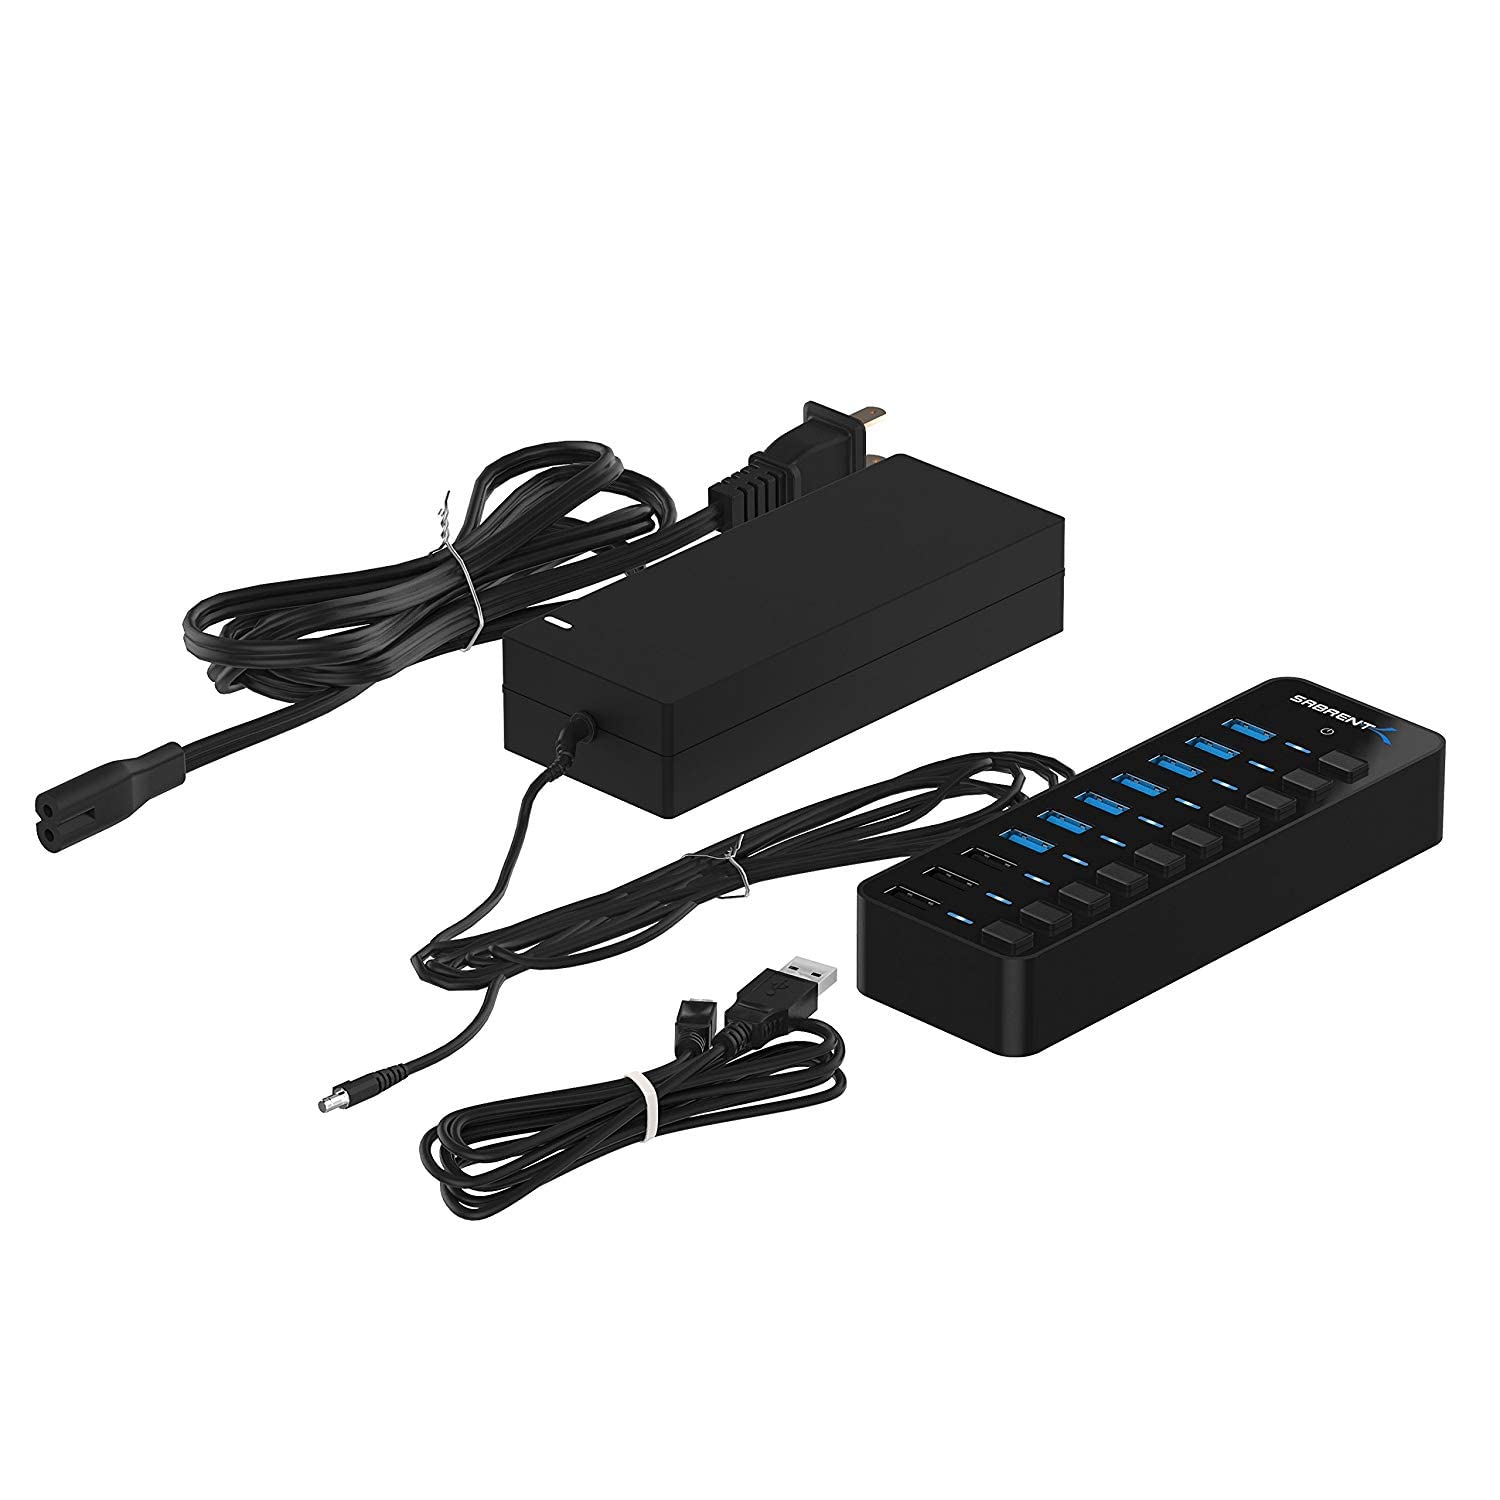 SABRENT 60W 10 Port USB 3.0 Hub Includes 3 Smart Charging Ports with Individual Power Switches and LEDs and 60W 12V/5A Power Adapter (HB-B7C3)